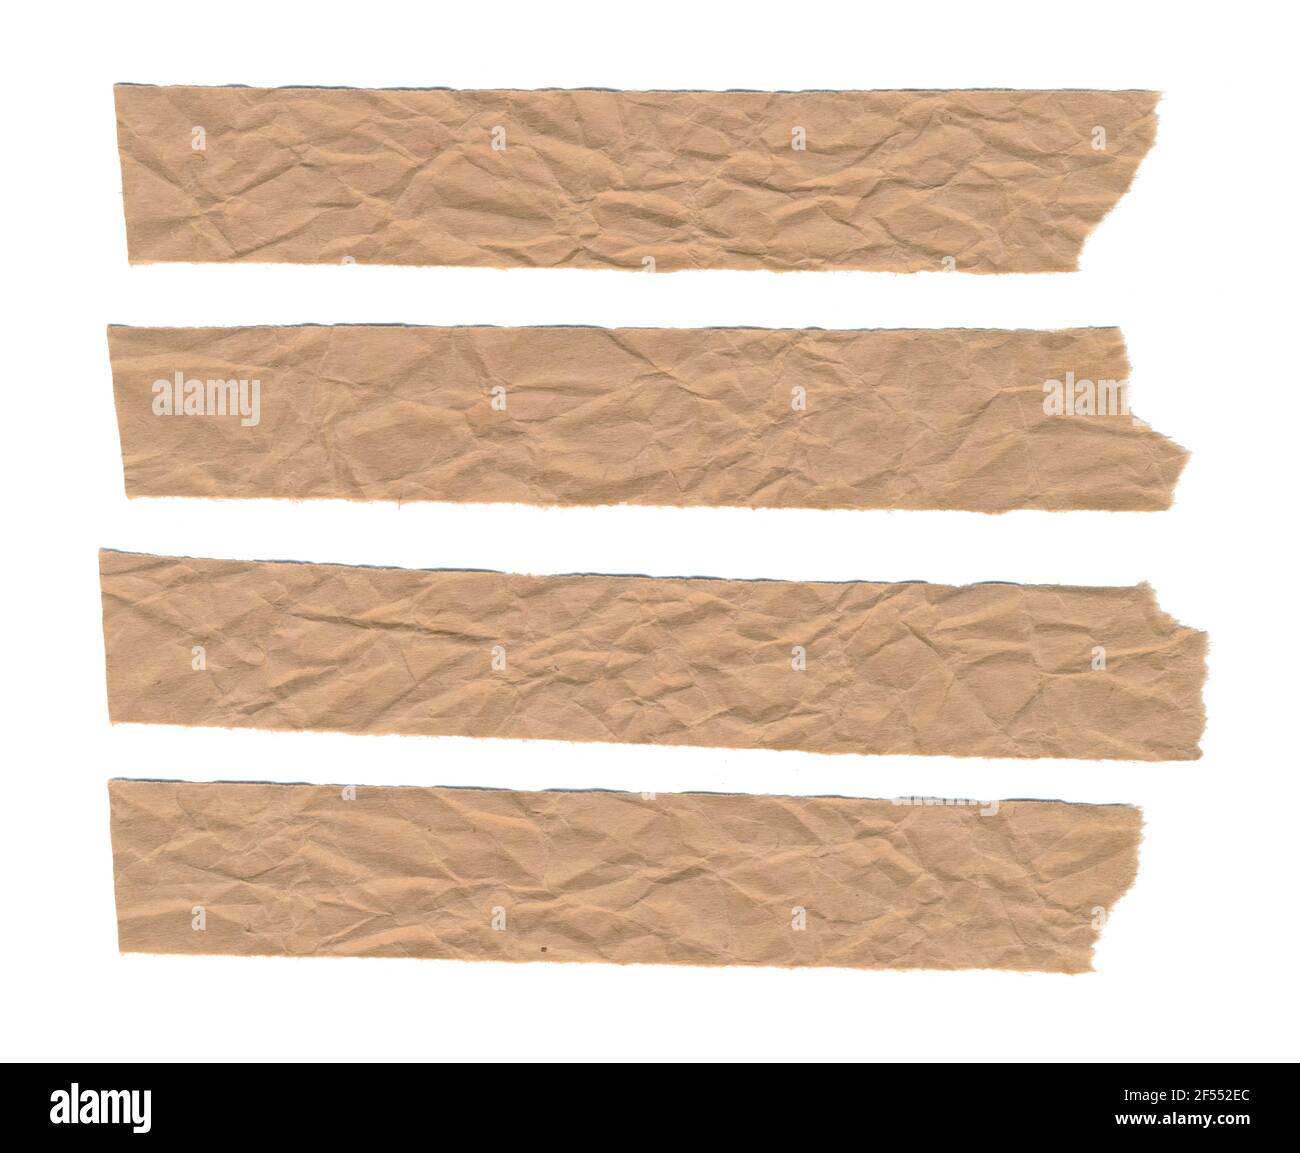 Torn strips of crumpled brown kraft paper on white background Stock Photo -  Alamy